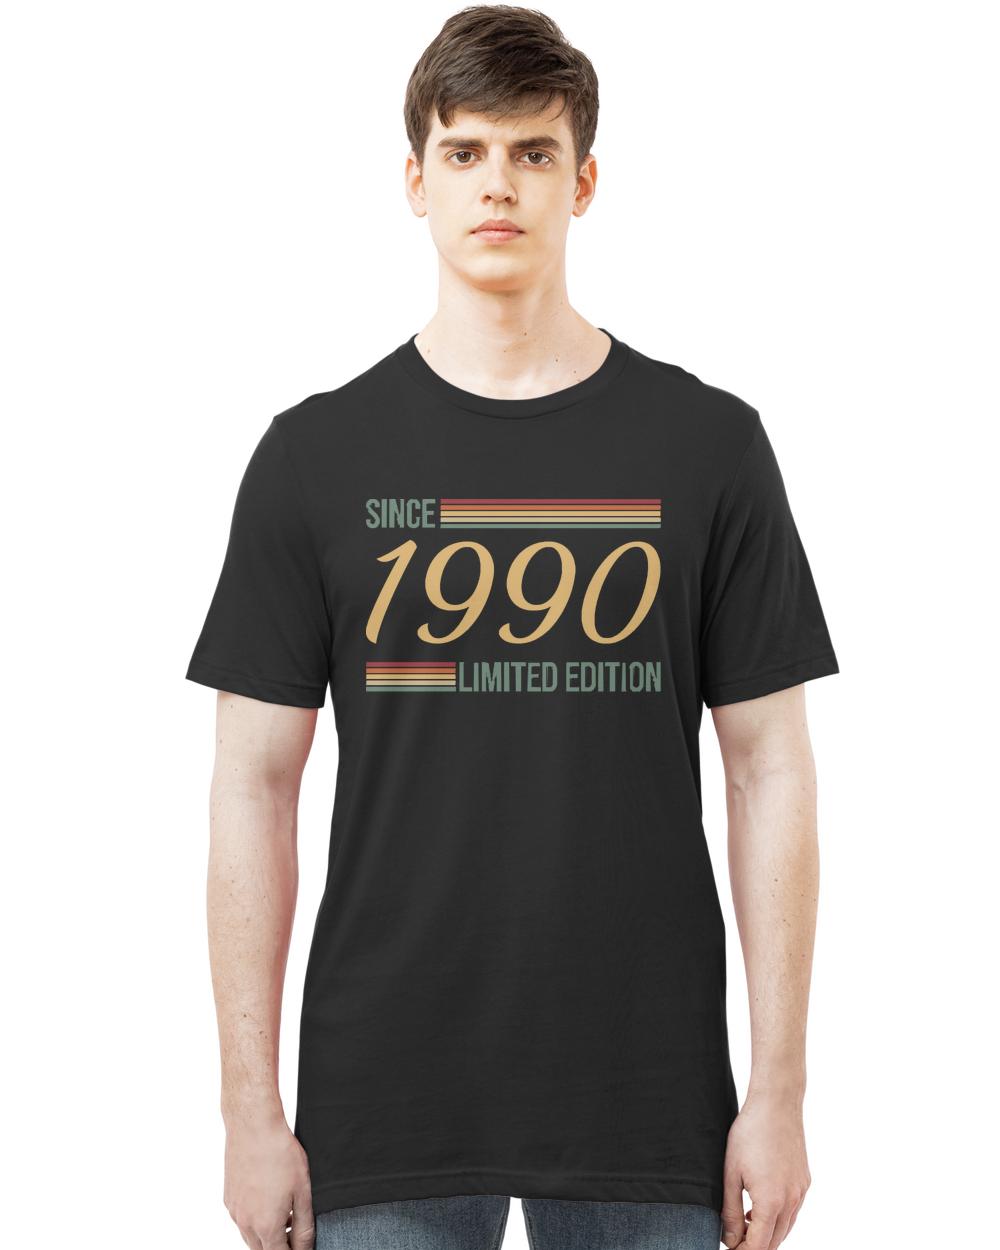 Since 1990 Limited Edition T-ShirtVintage Since 1990 Limited Edition T-Shirt